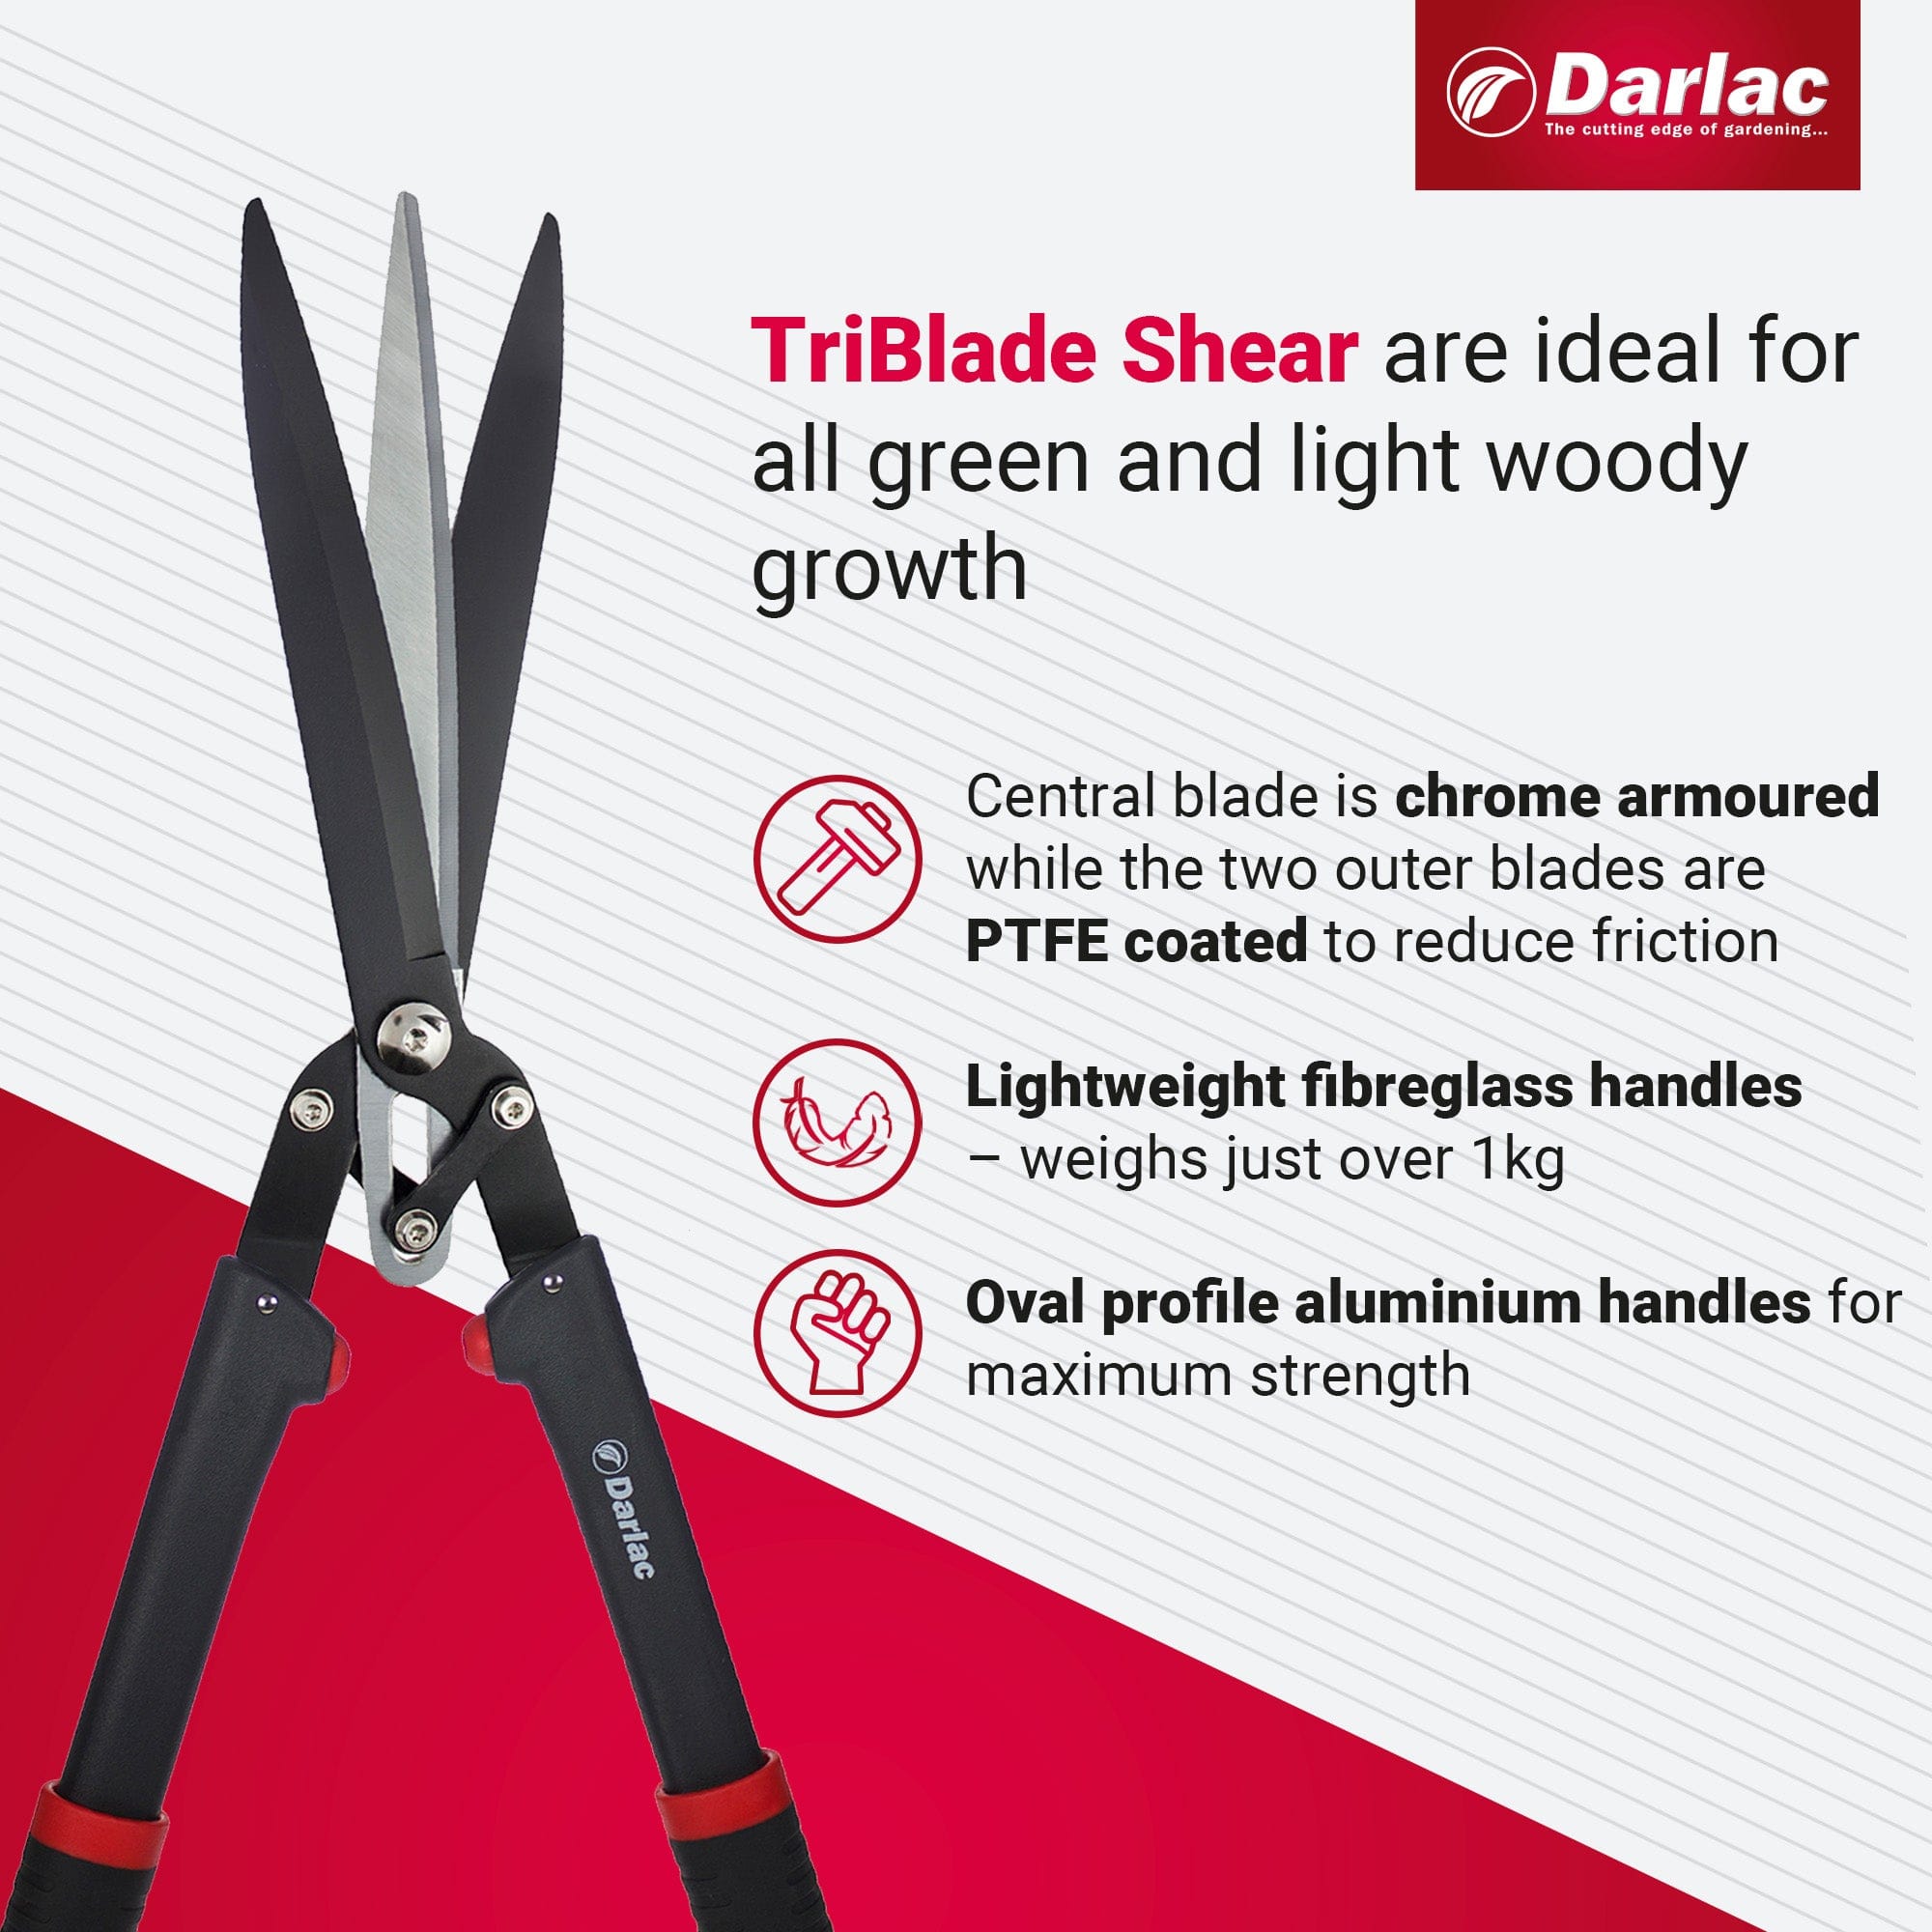 dt-brown HARDWARE Darlac Tri-Blade Shear with Fibre Glass Handles